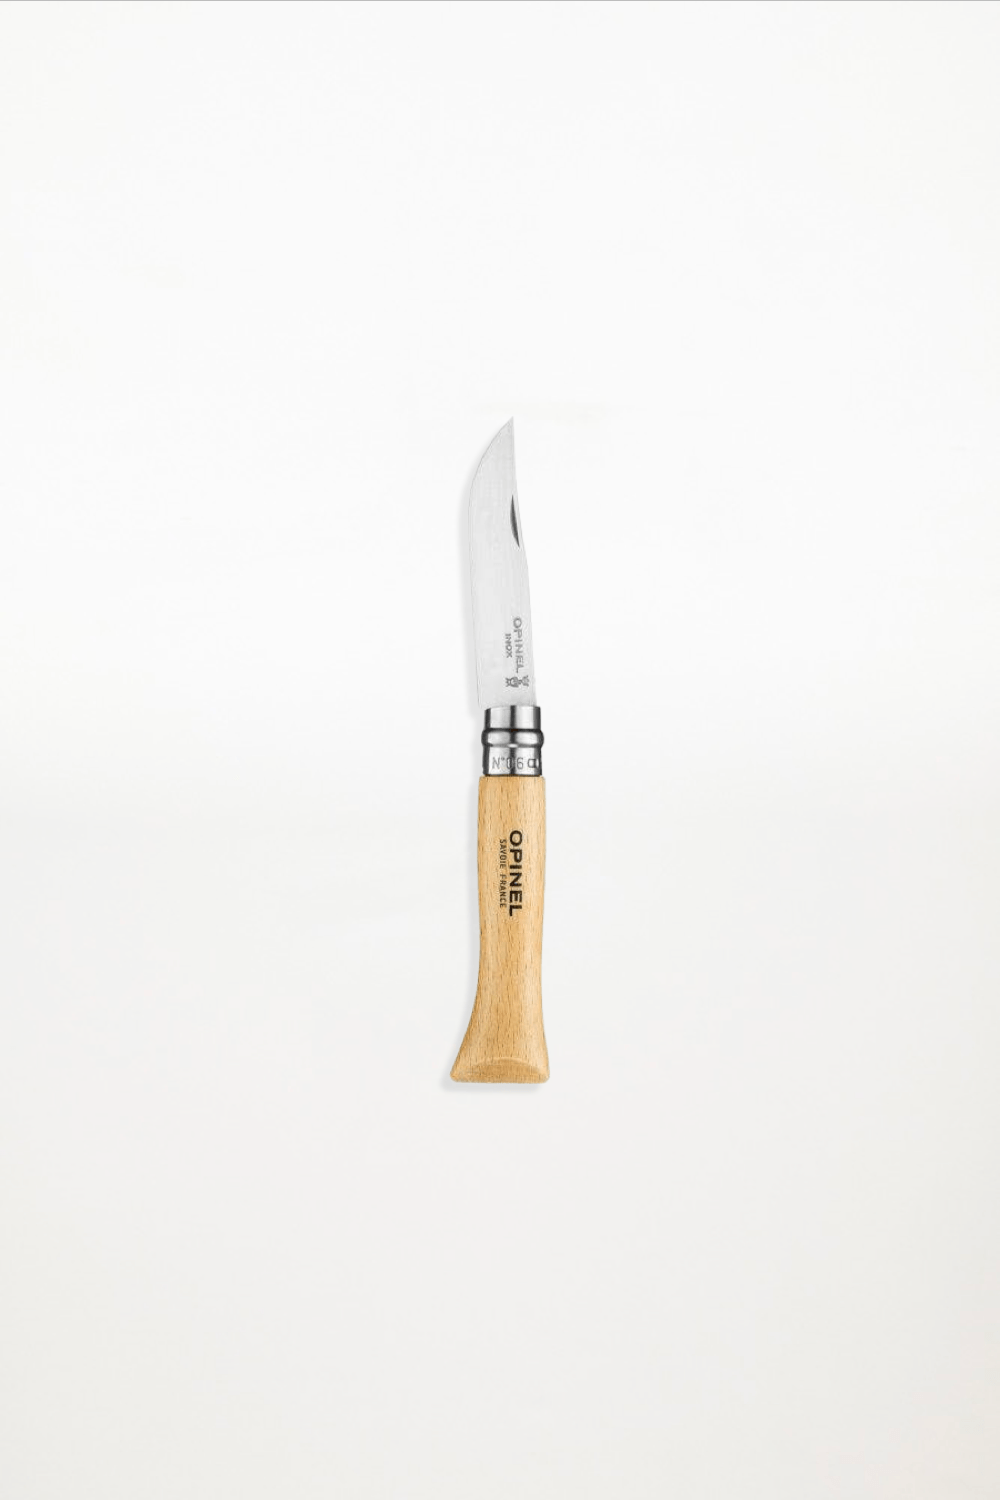 Opinel - Traditional French Pocket Knife - N6 - Ensemble Studios